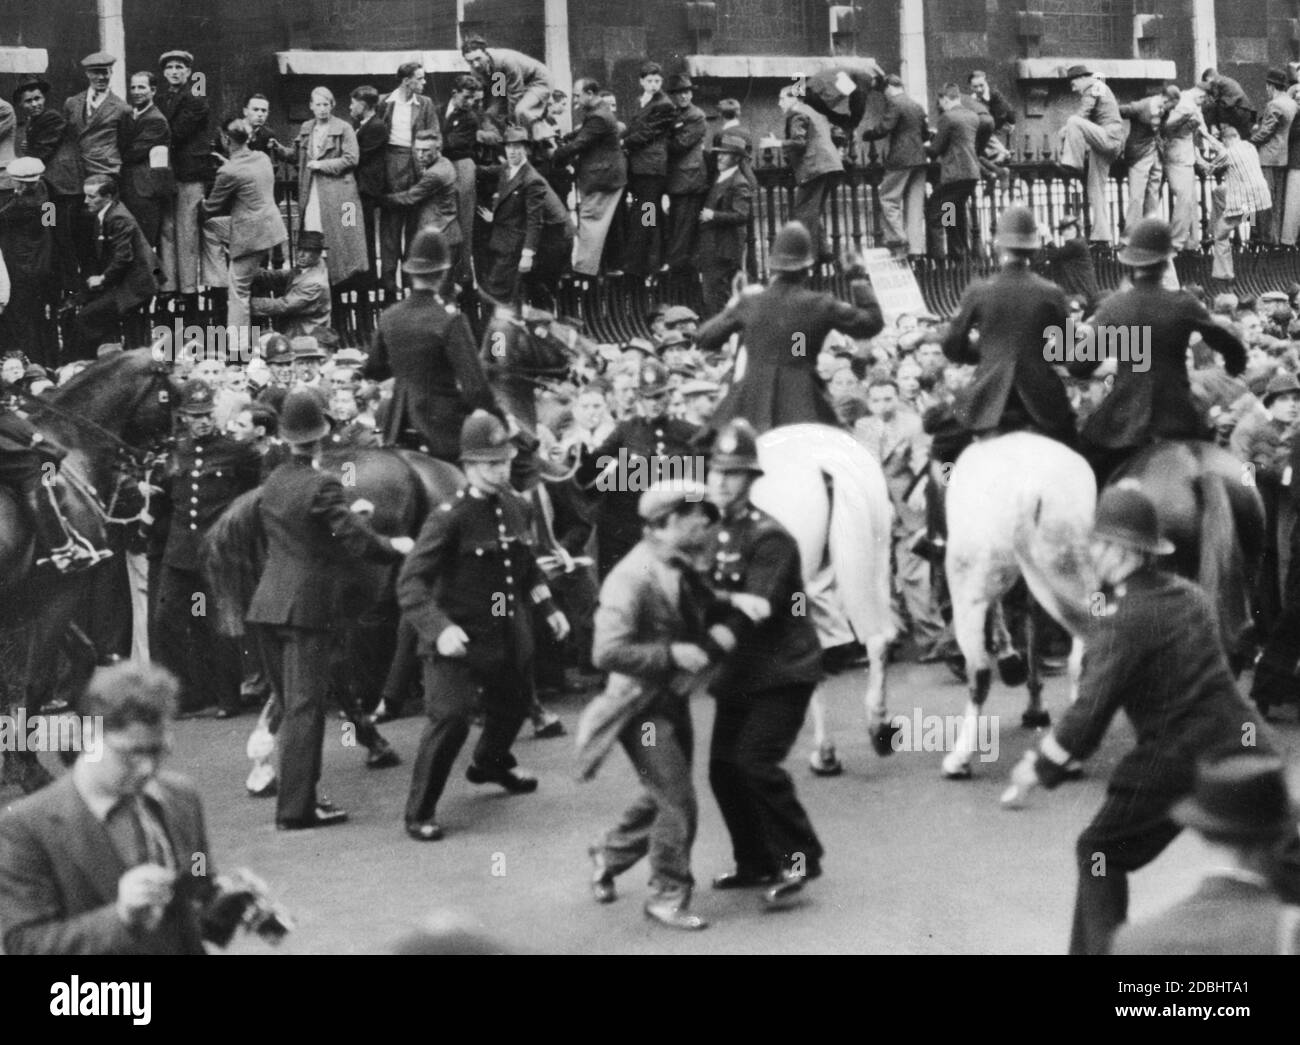 "Clashes between demonstrators and police in London. On the occasion of a planned march of the ""British Union of Fascists"" (BUF) numerous counter-demonstrators gathered in London." Stock Photo